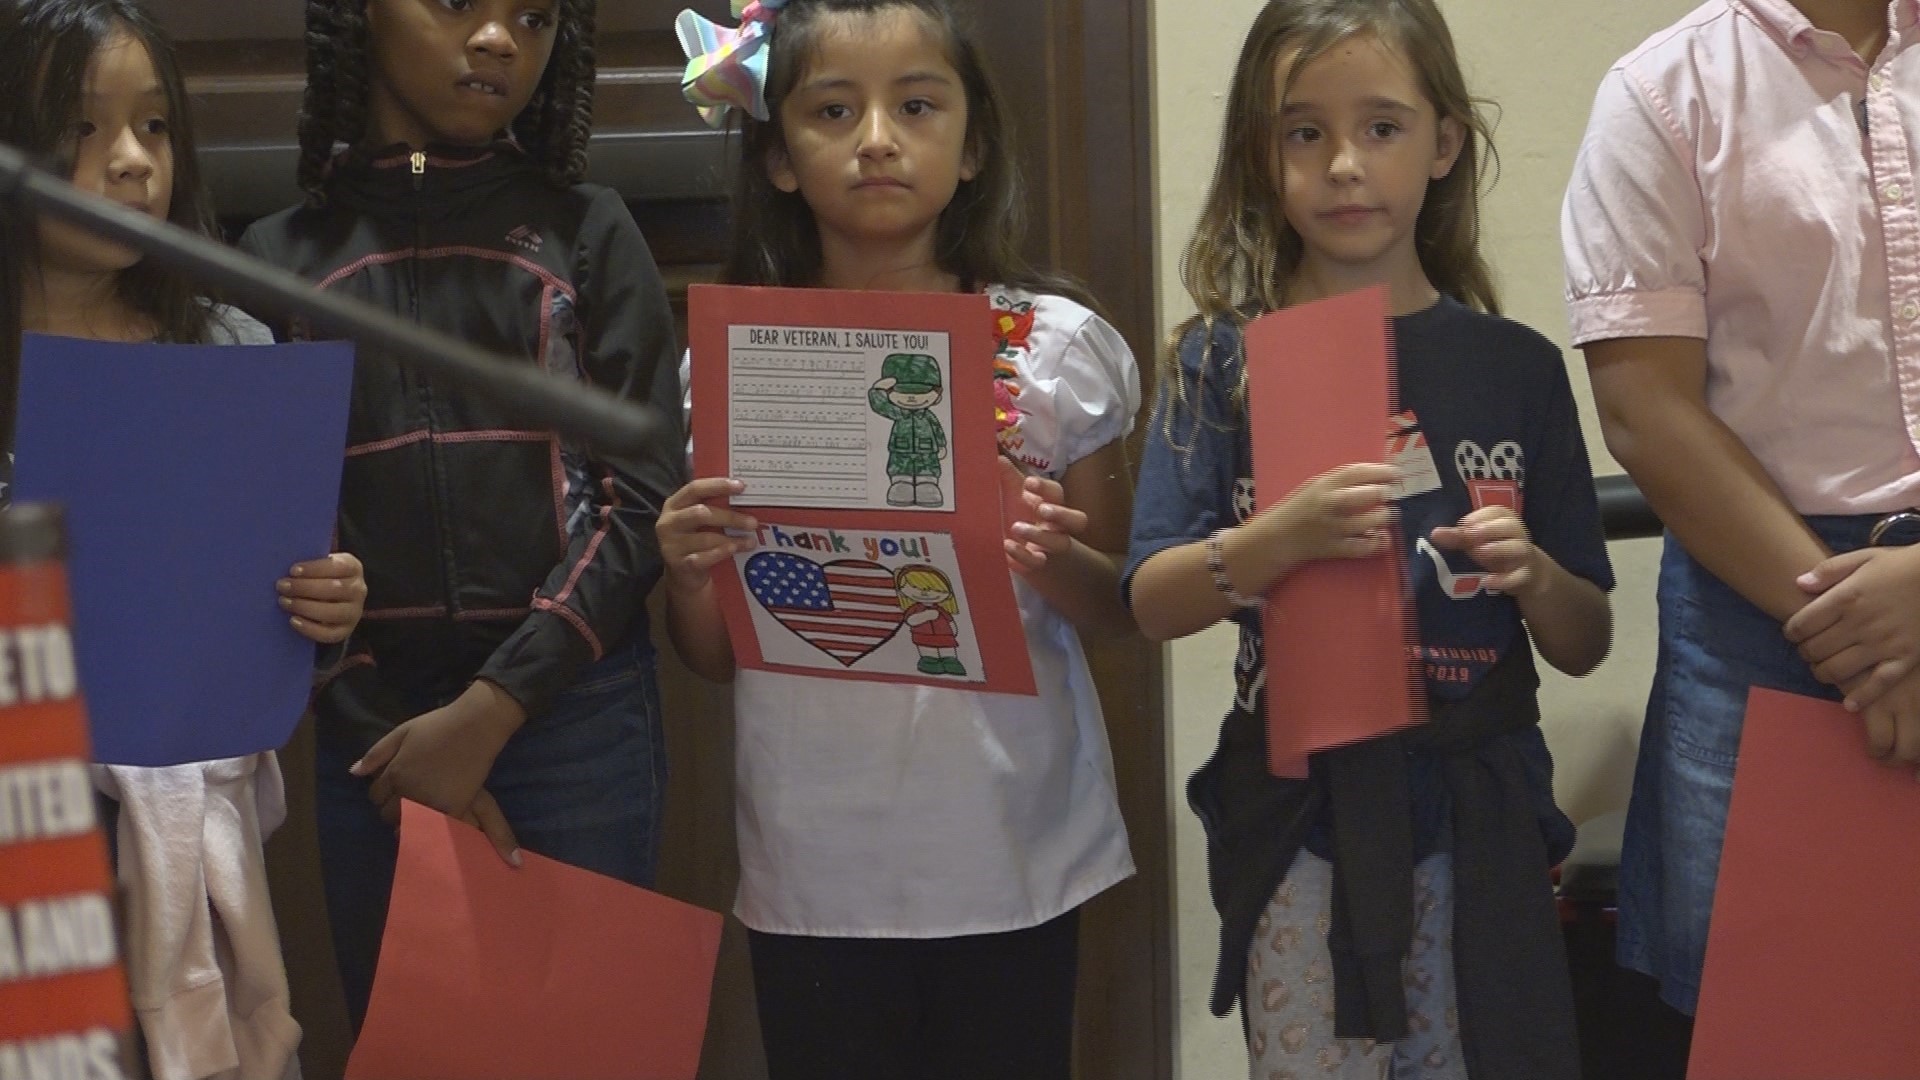 The students themselves hand-delivered the letters to the Buckner Villas veterans during their Veterans Day program at 10 a.m.